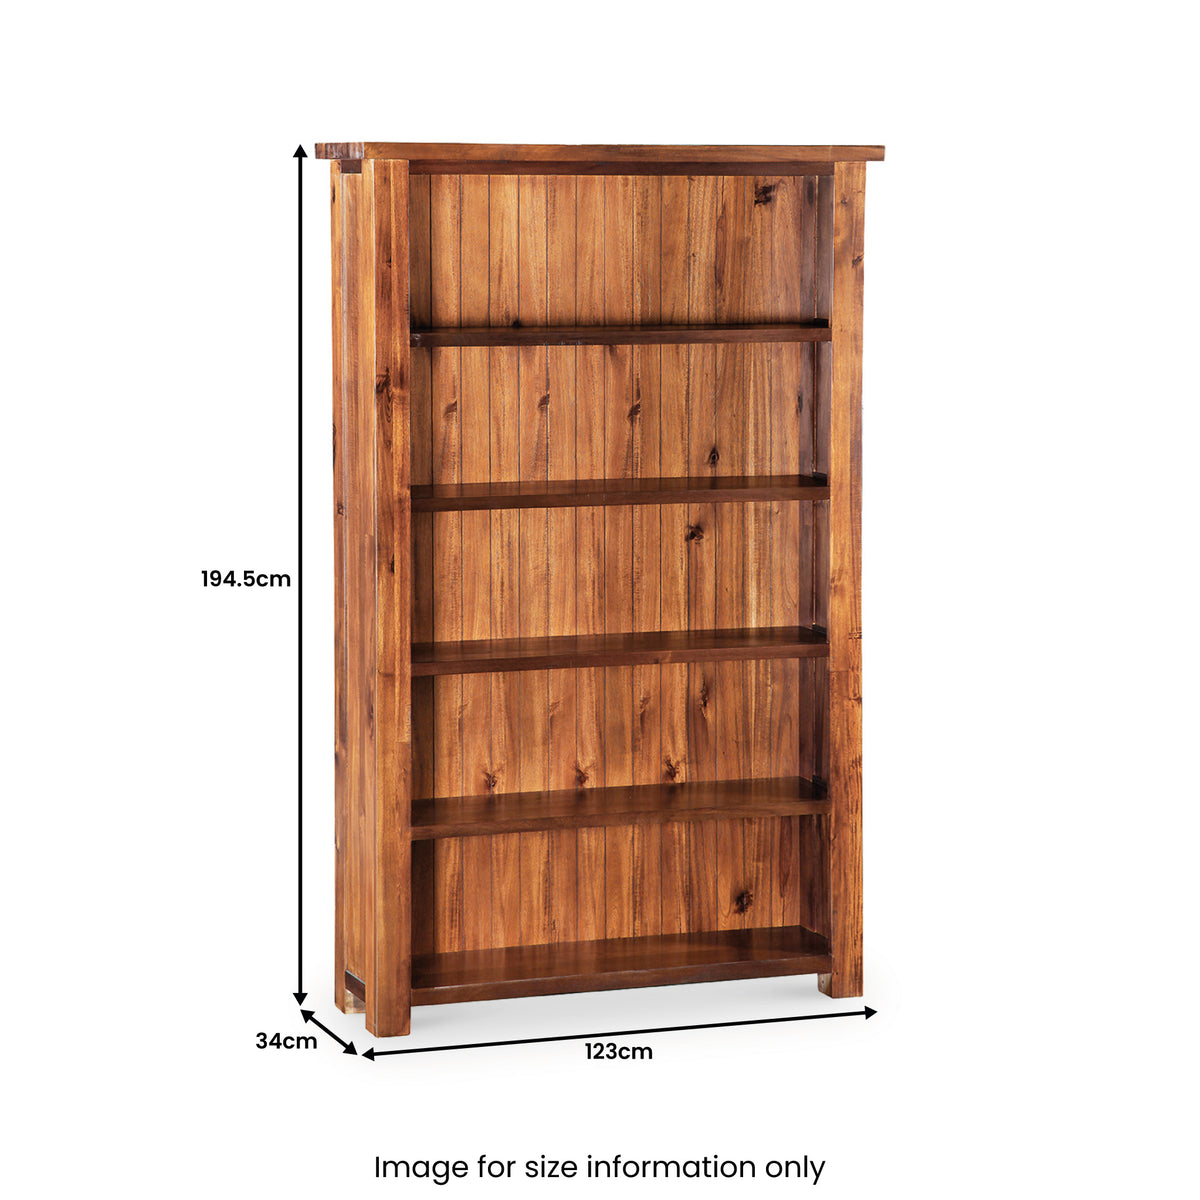 Ladock Large Bookcase dimensions